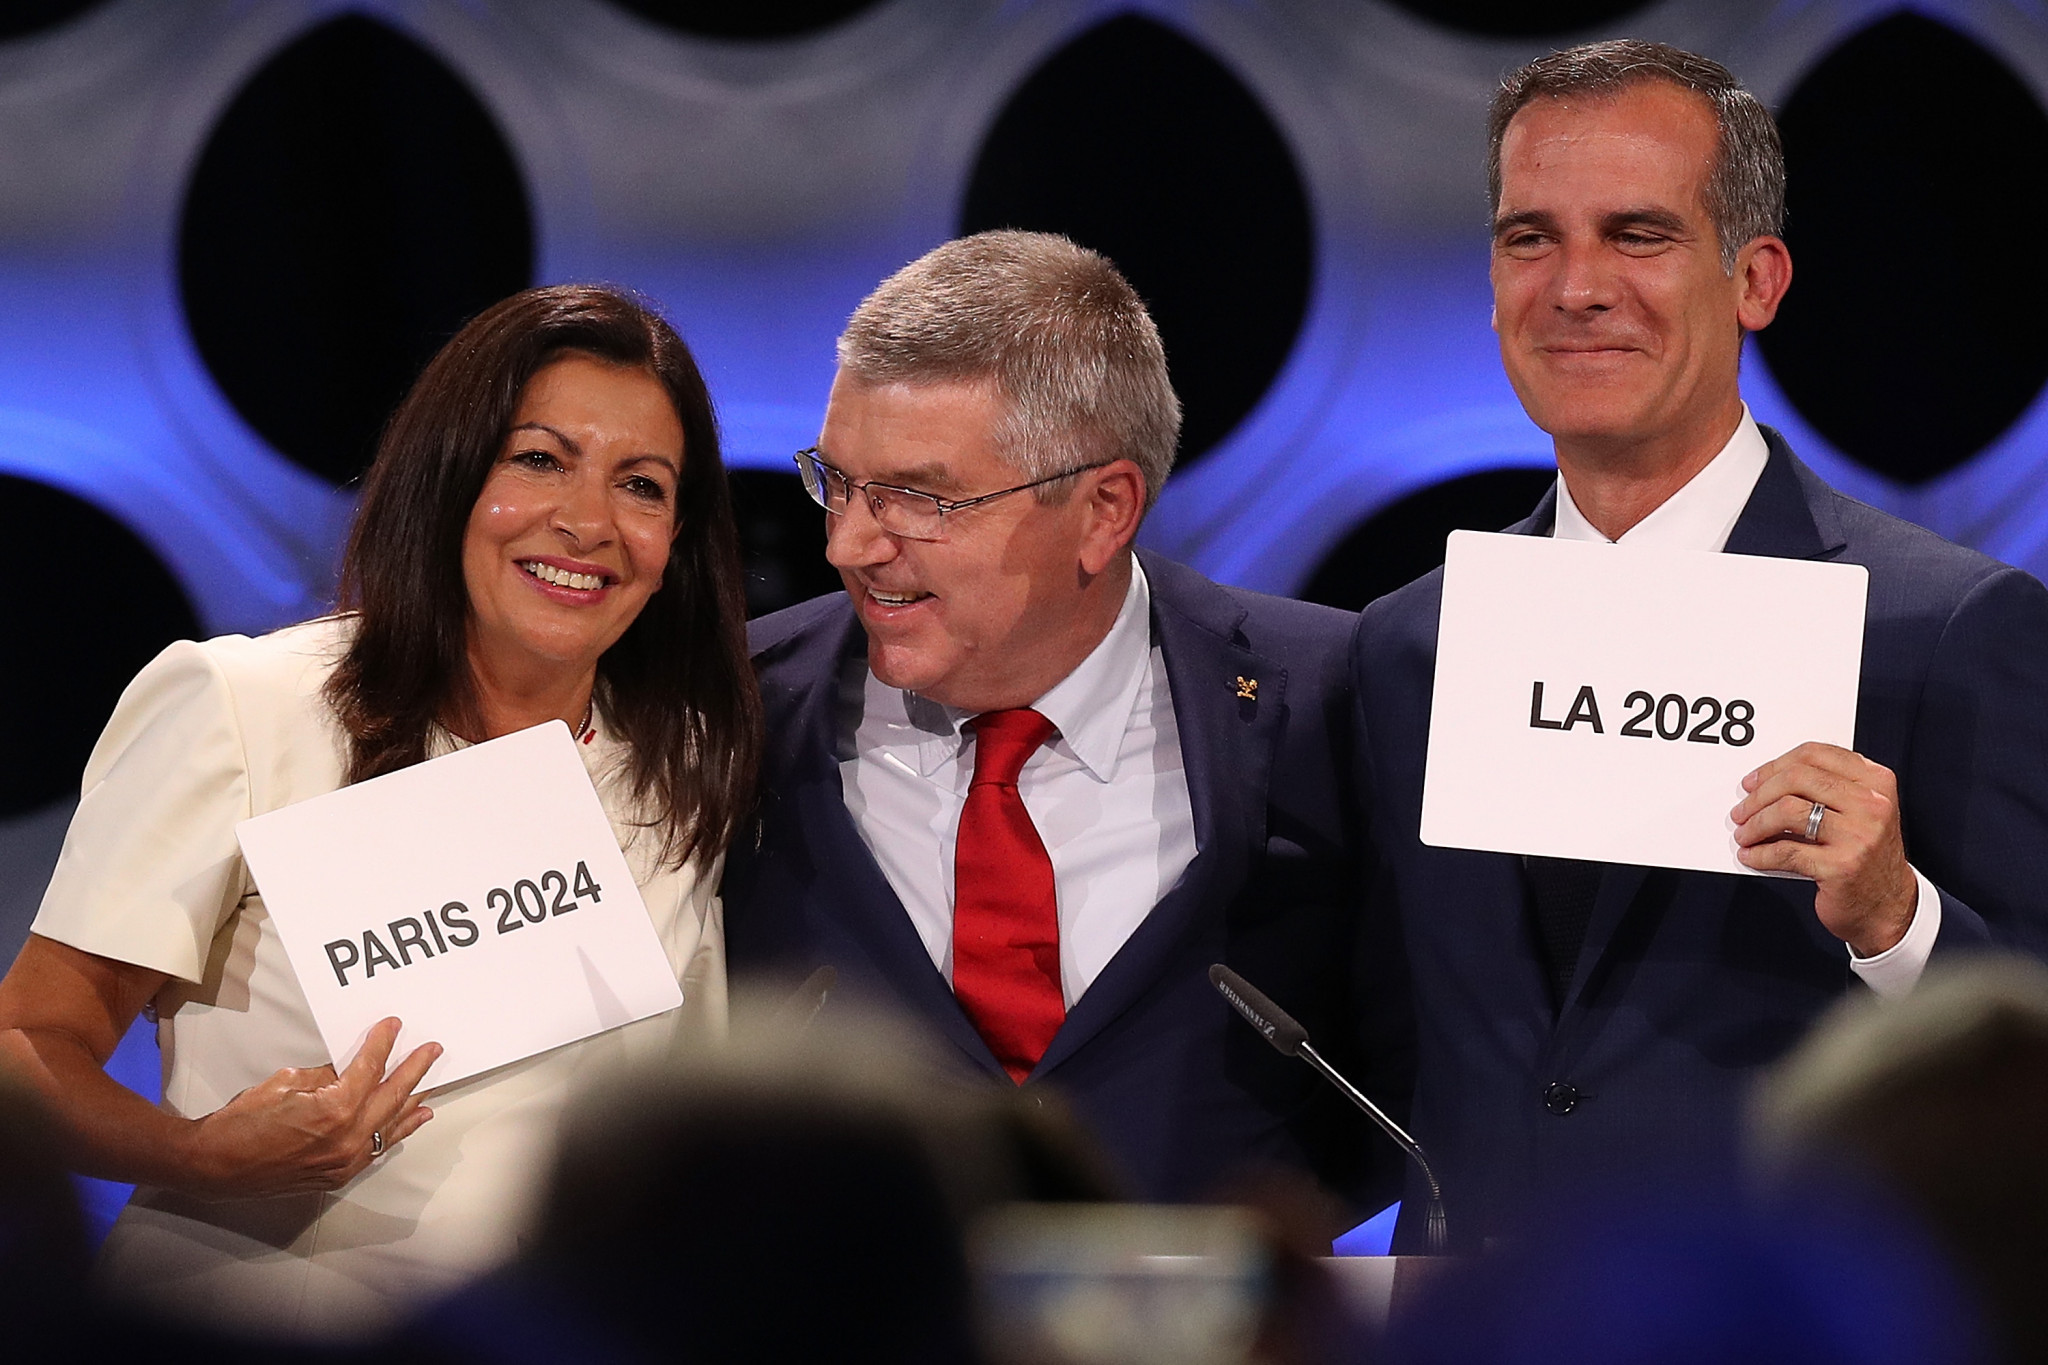 Olympic Agenda 2020 has been an ever-present feature of Thomas Bach's IOC Presidency but did not forecast the joint award of the 2024 and 2028 Games to Paris and LA ©Getty Images